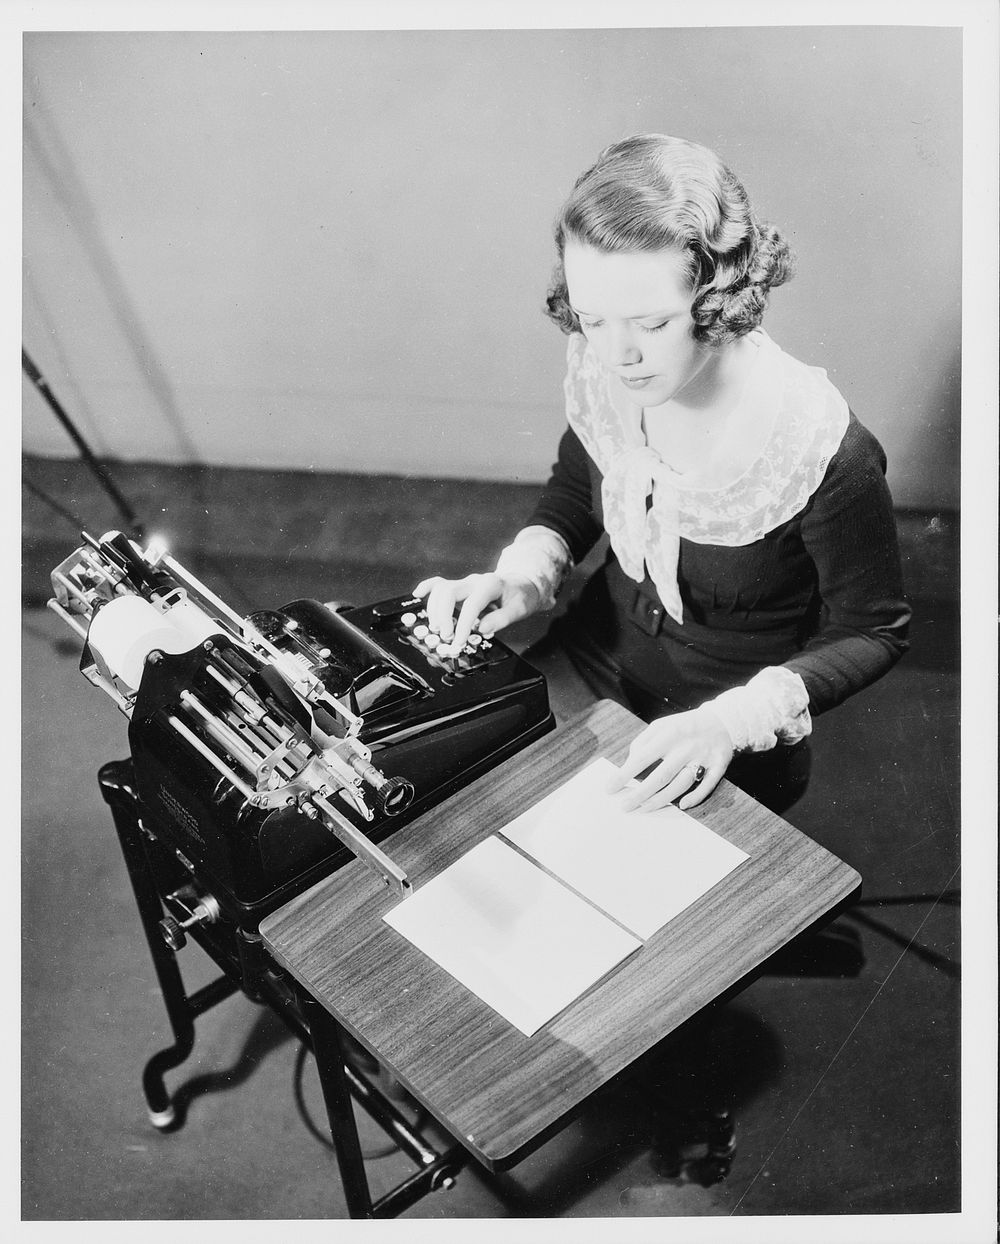 Girl using adding machine. Sourced from the Library of Congress.